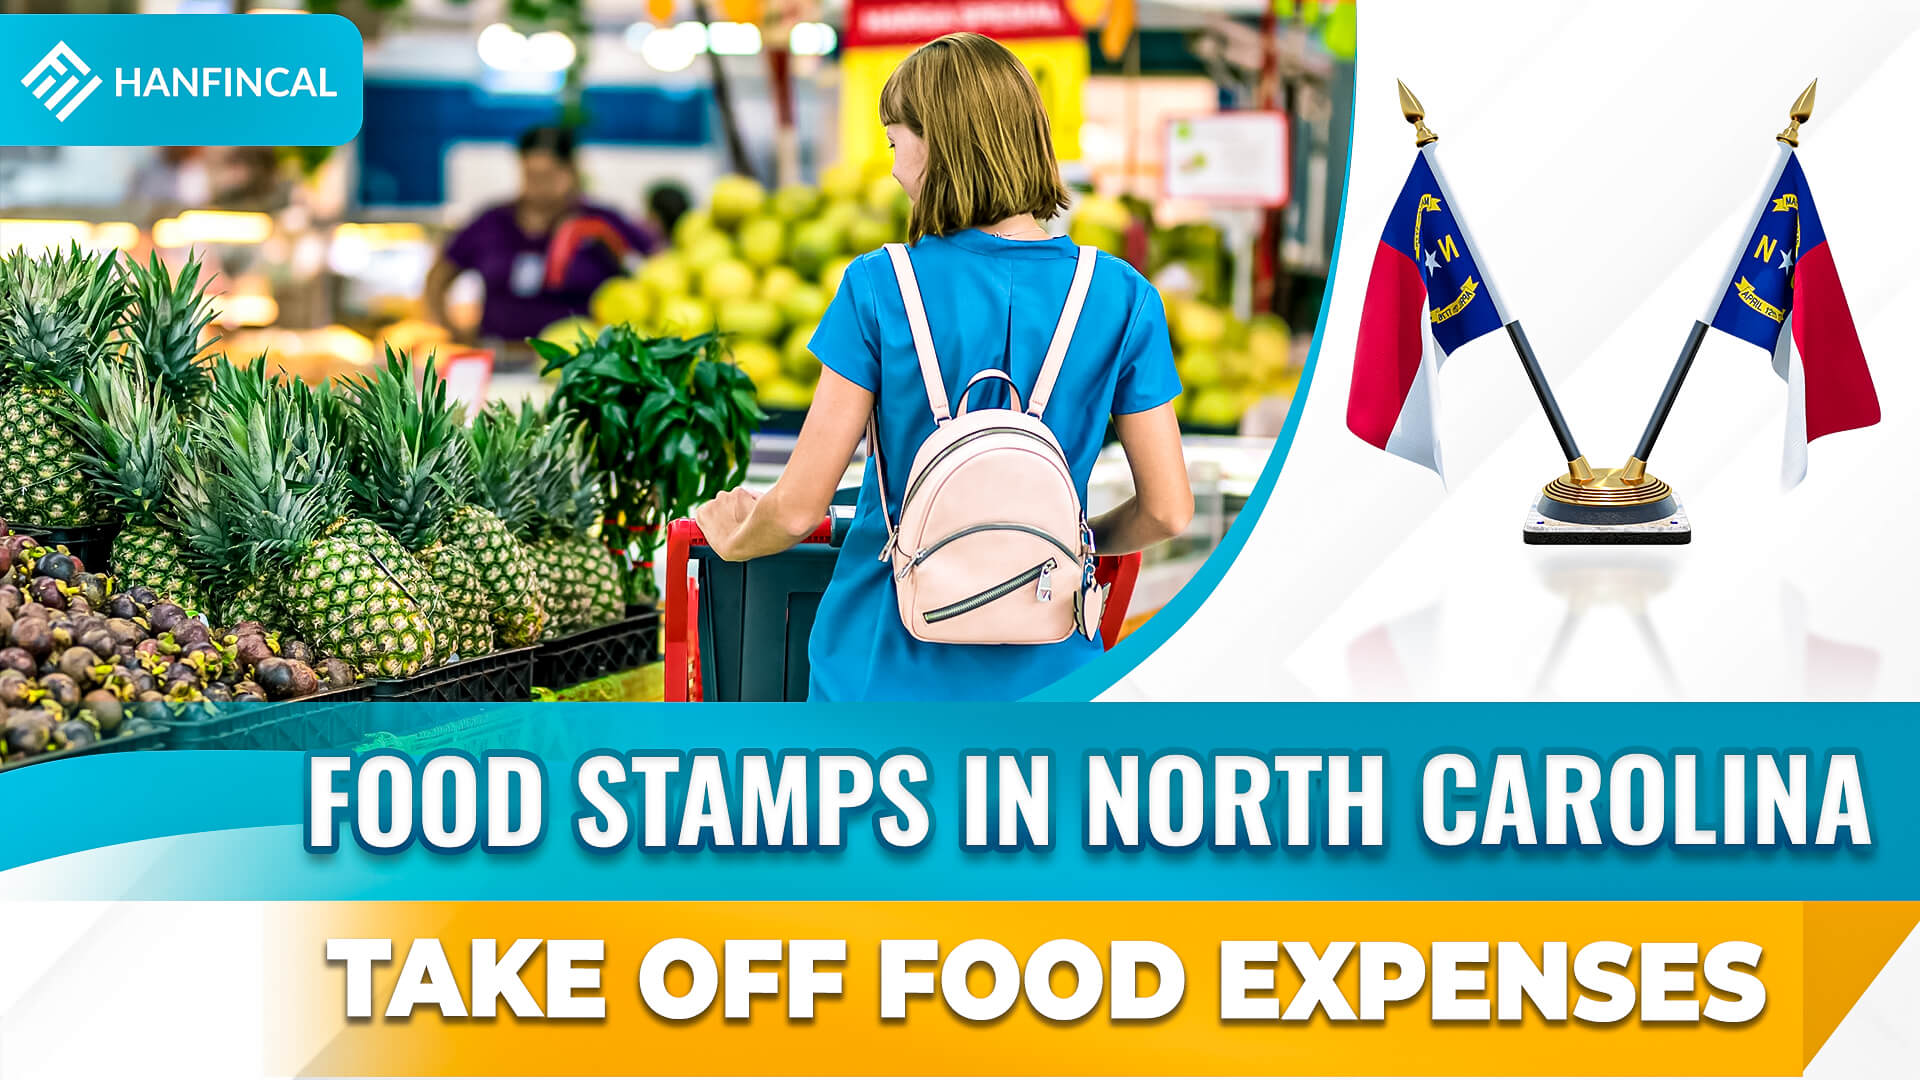 5 Essential Elements For Food stamps in north carolina Hanfincal Official